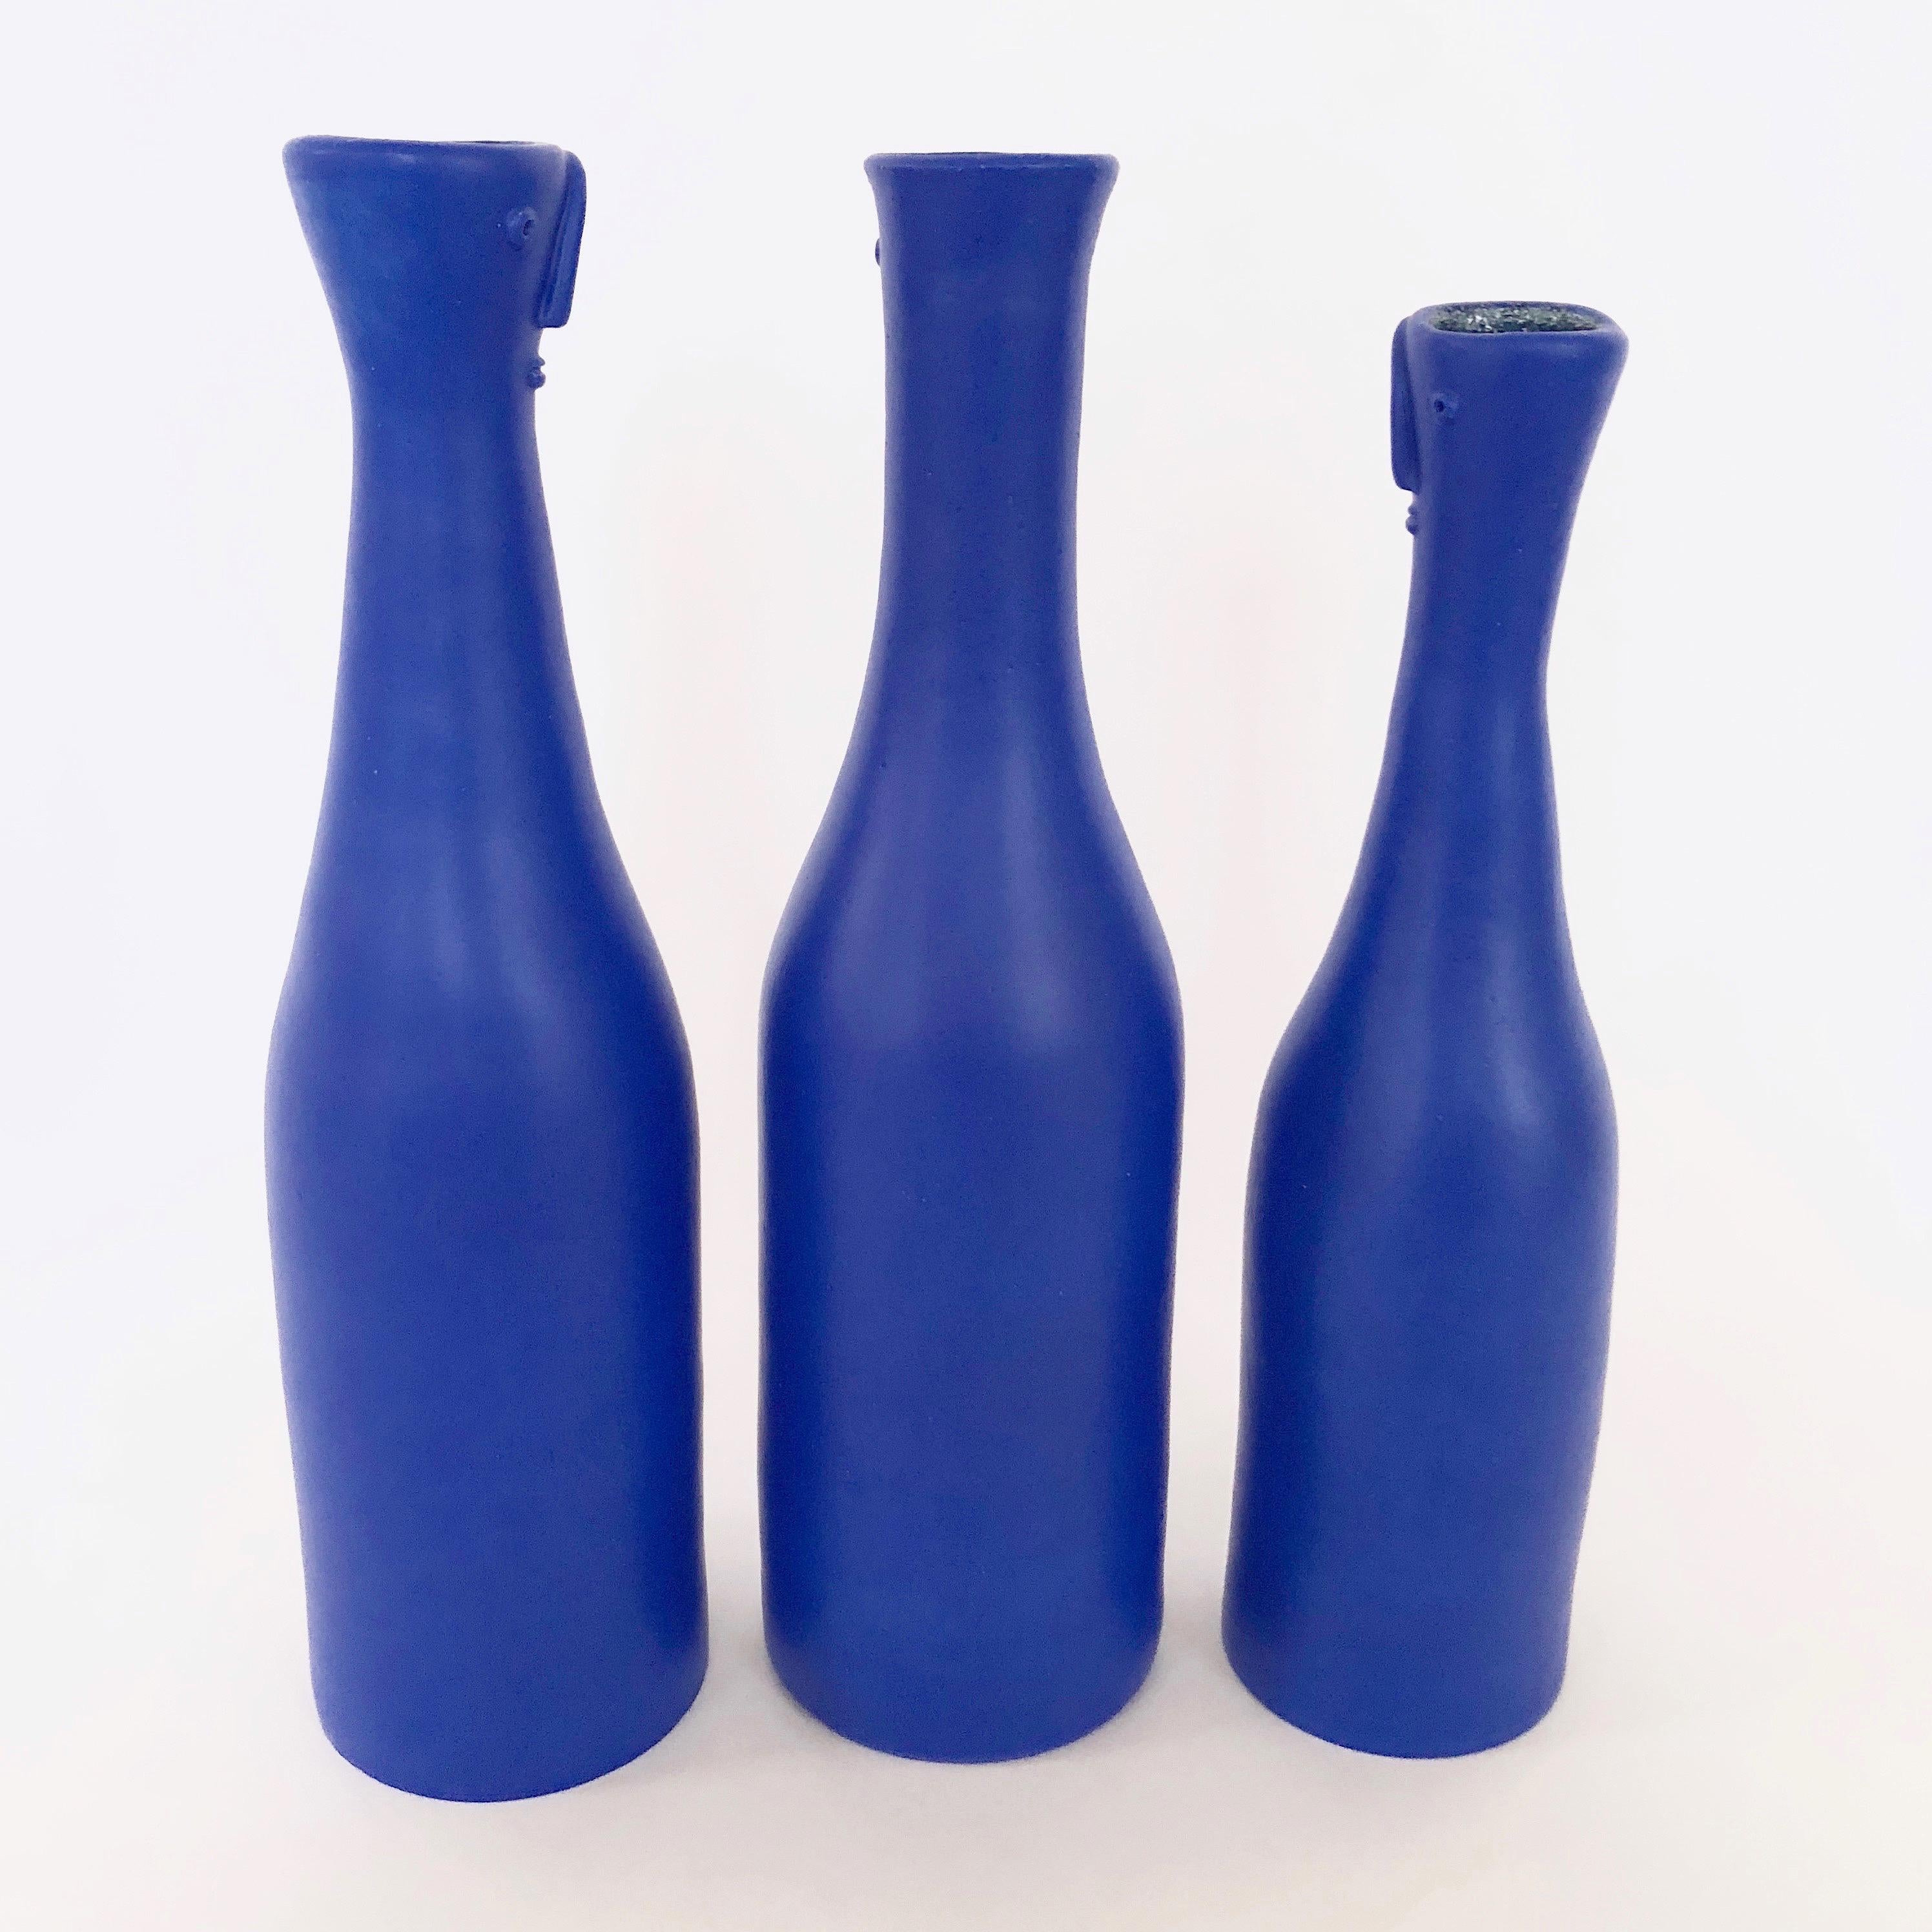 Set of ceramic bottles, figurative shaped, ceramic glazed in deep blue, decorated with stylized faces sculpted front.
One of a kind handmade pieces, signed by the French ceramicists, the Dalo.

The dimensions approx are: 
Bottle 1: H 38.5 cm - D 10